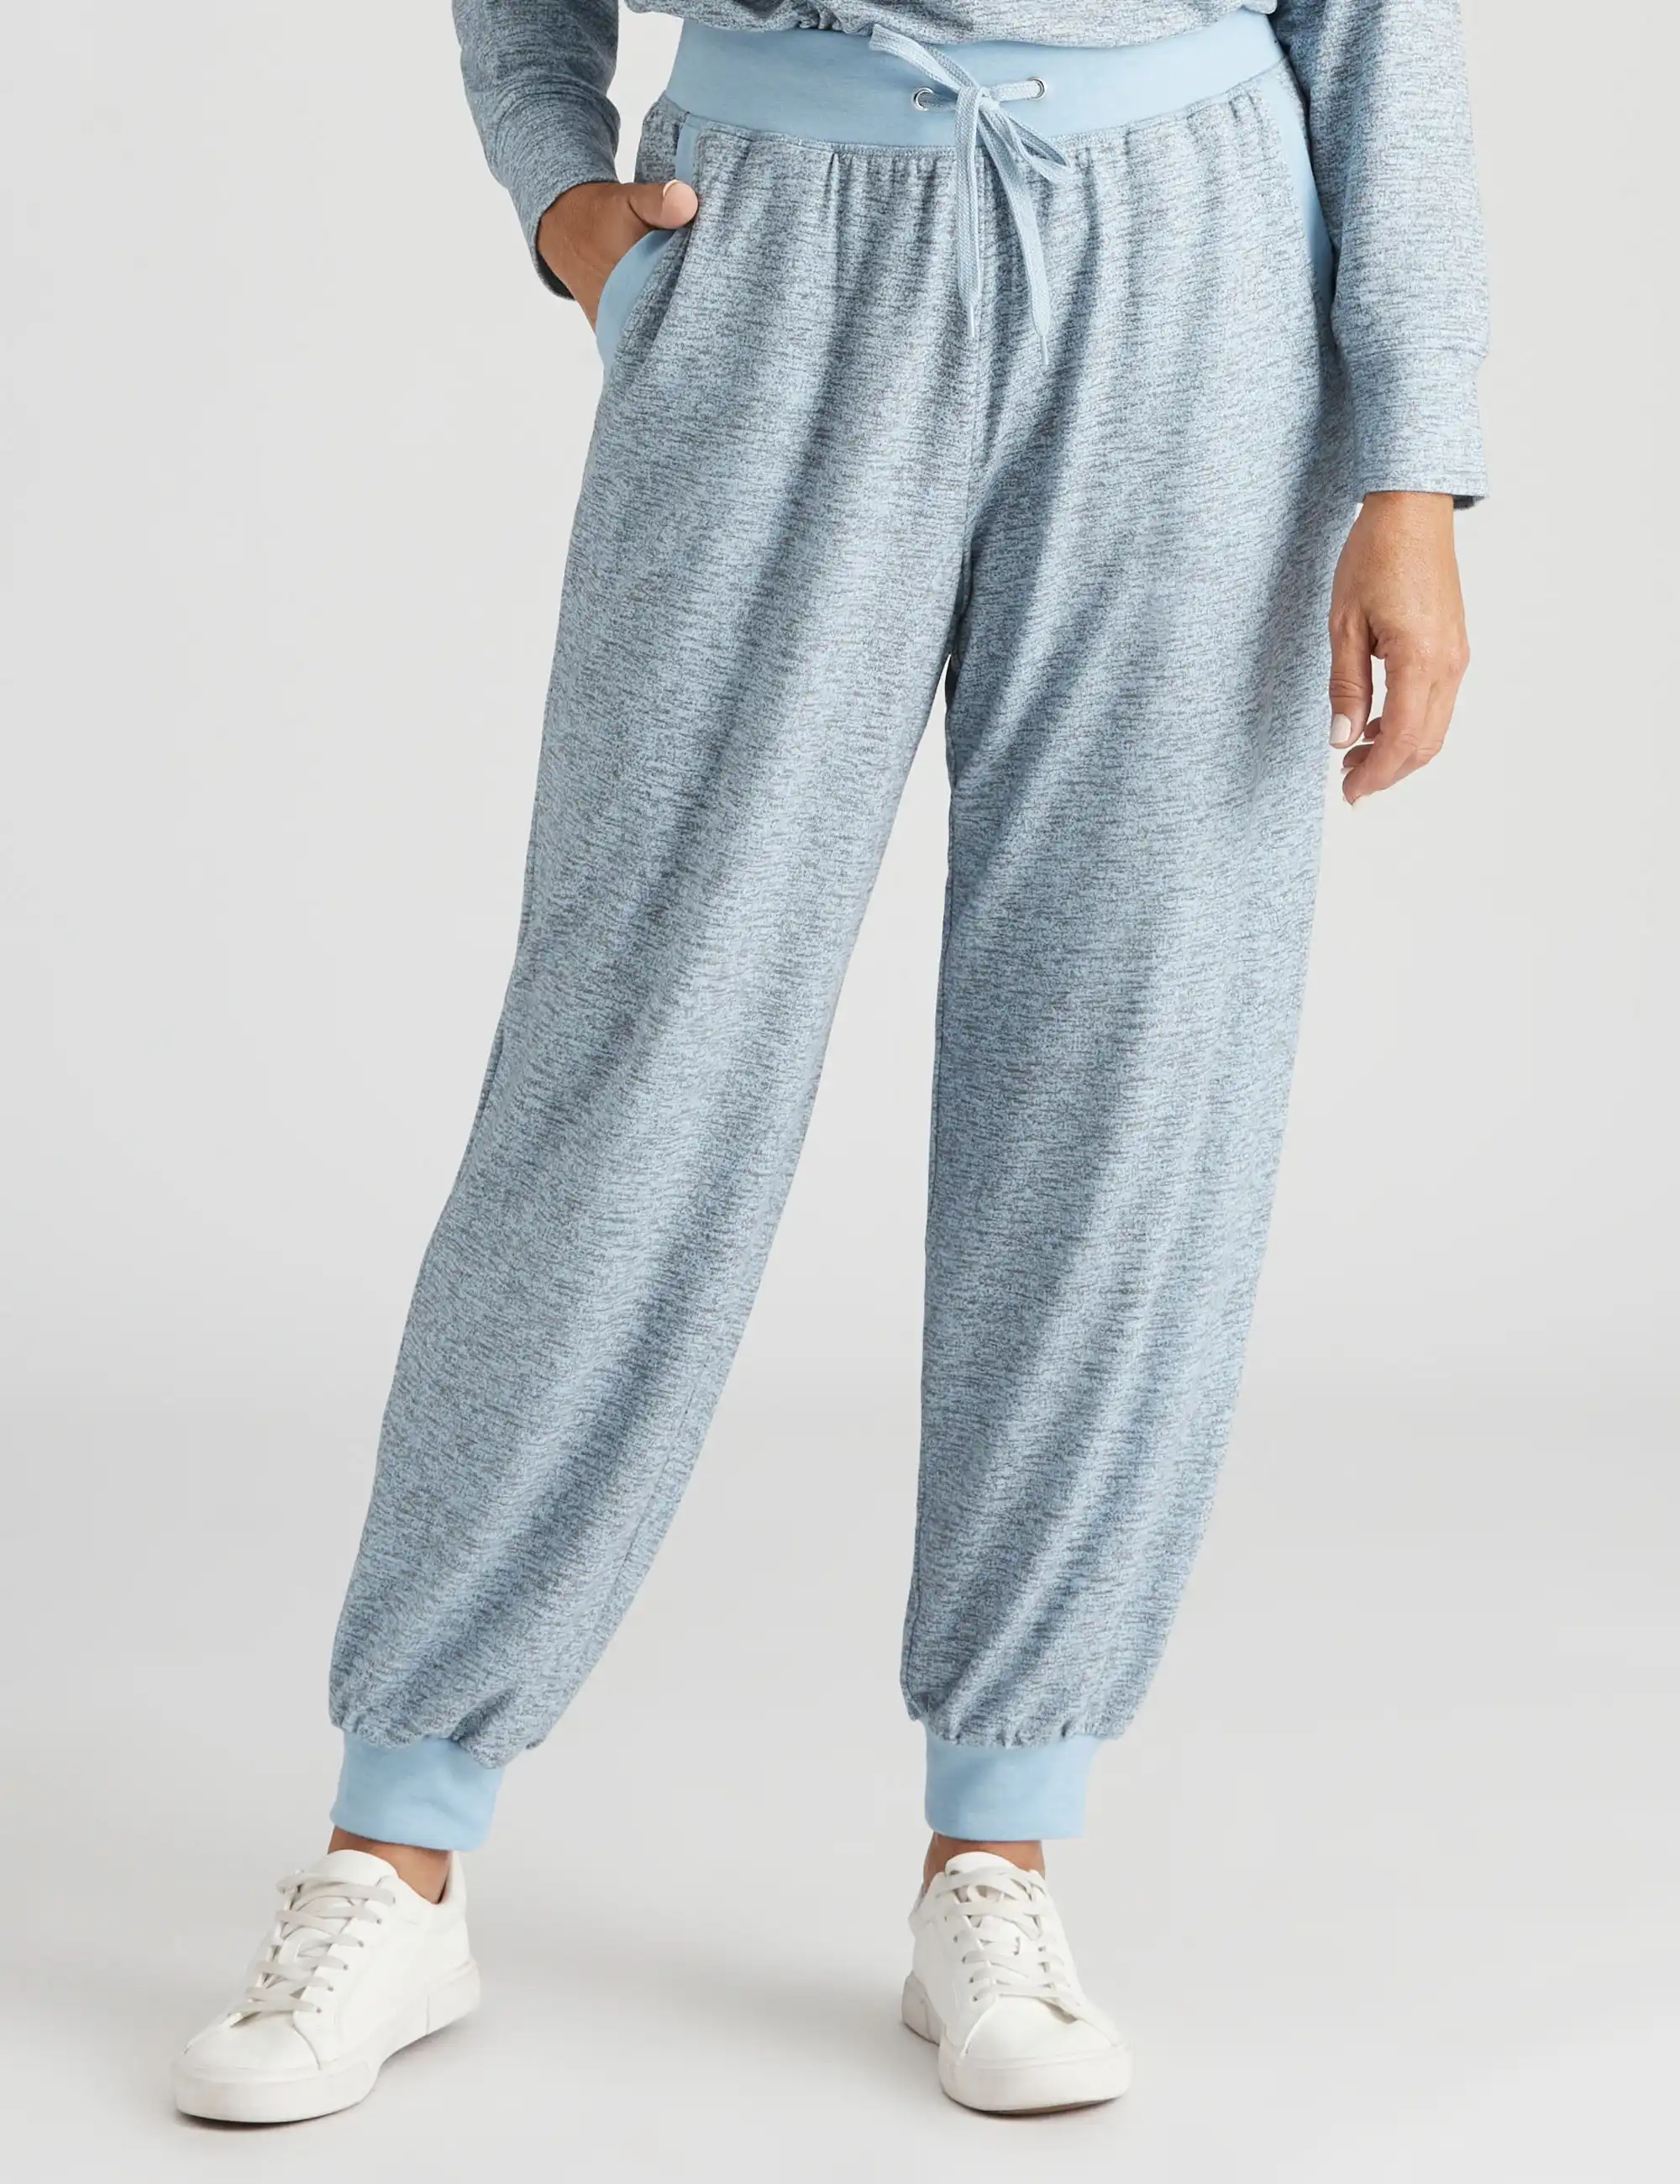 Millers Lounge Soft Blue Marl with Rib Cuff Pants